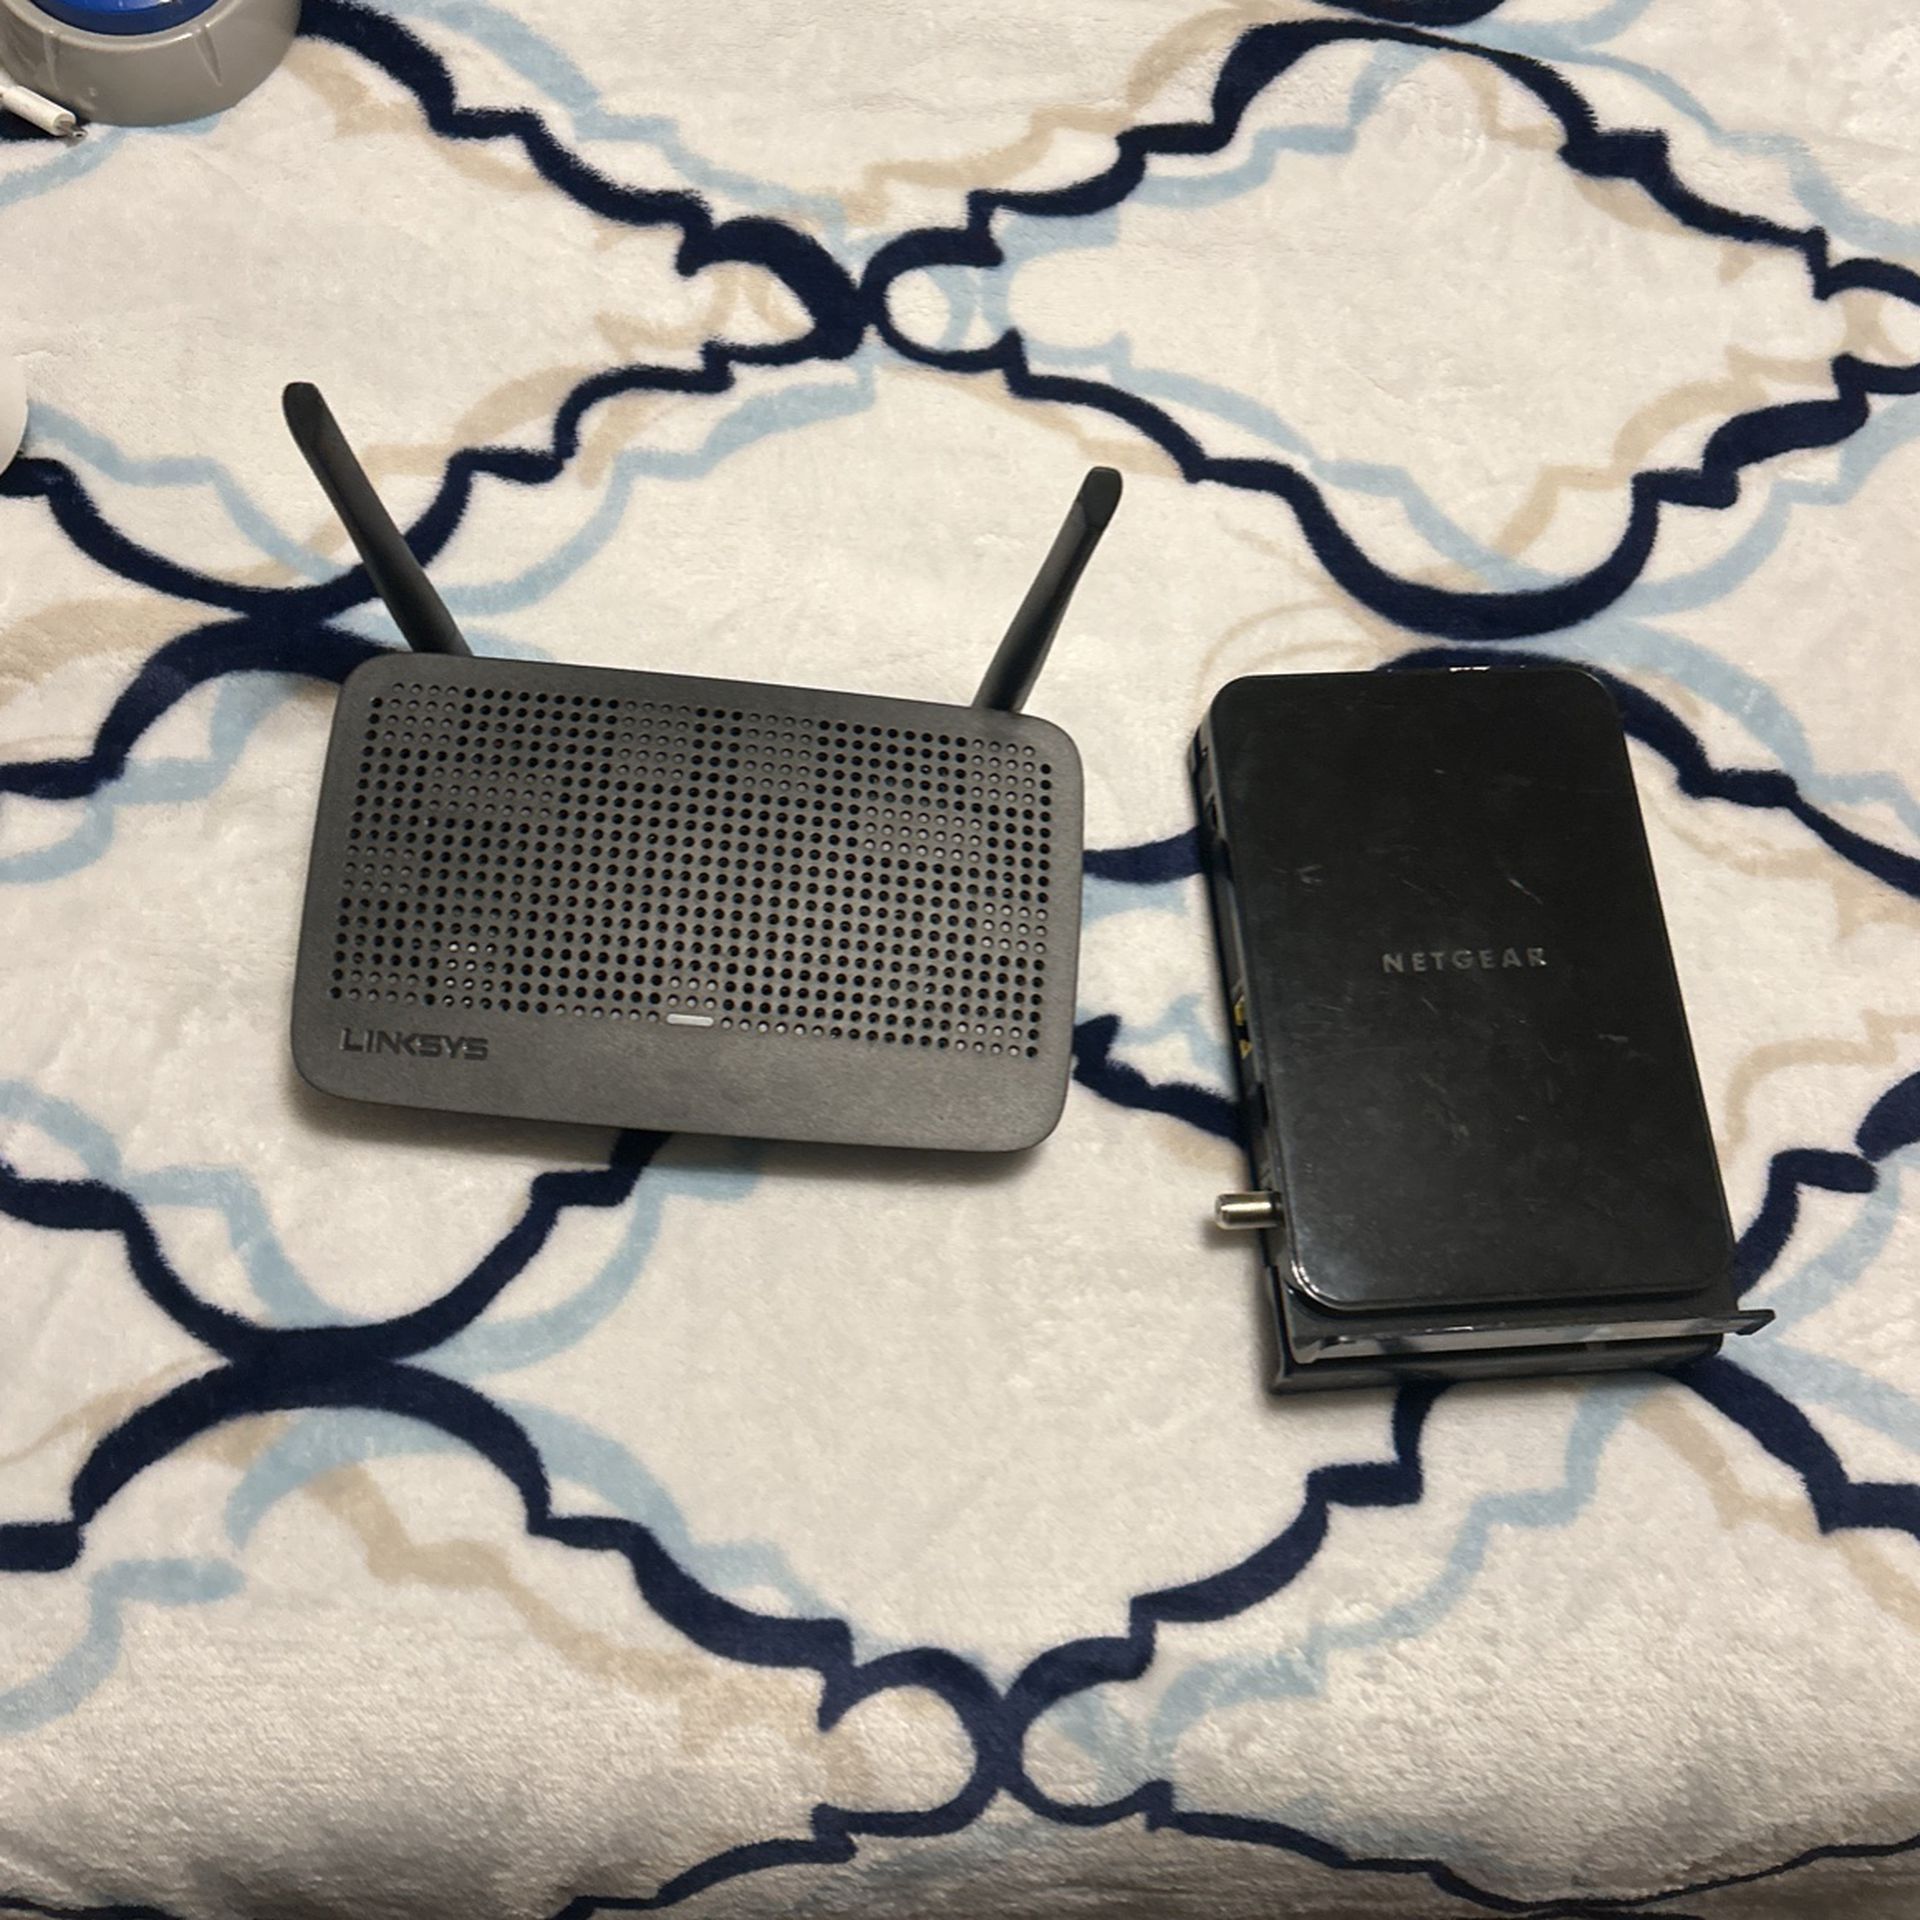 2 routers